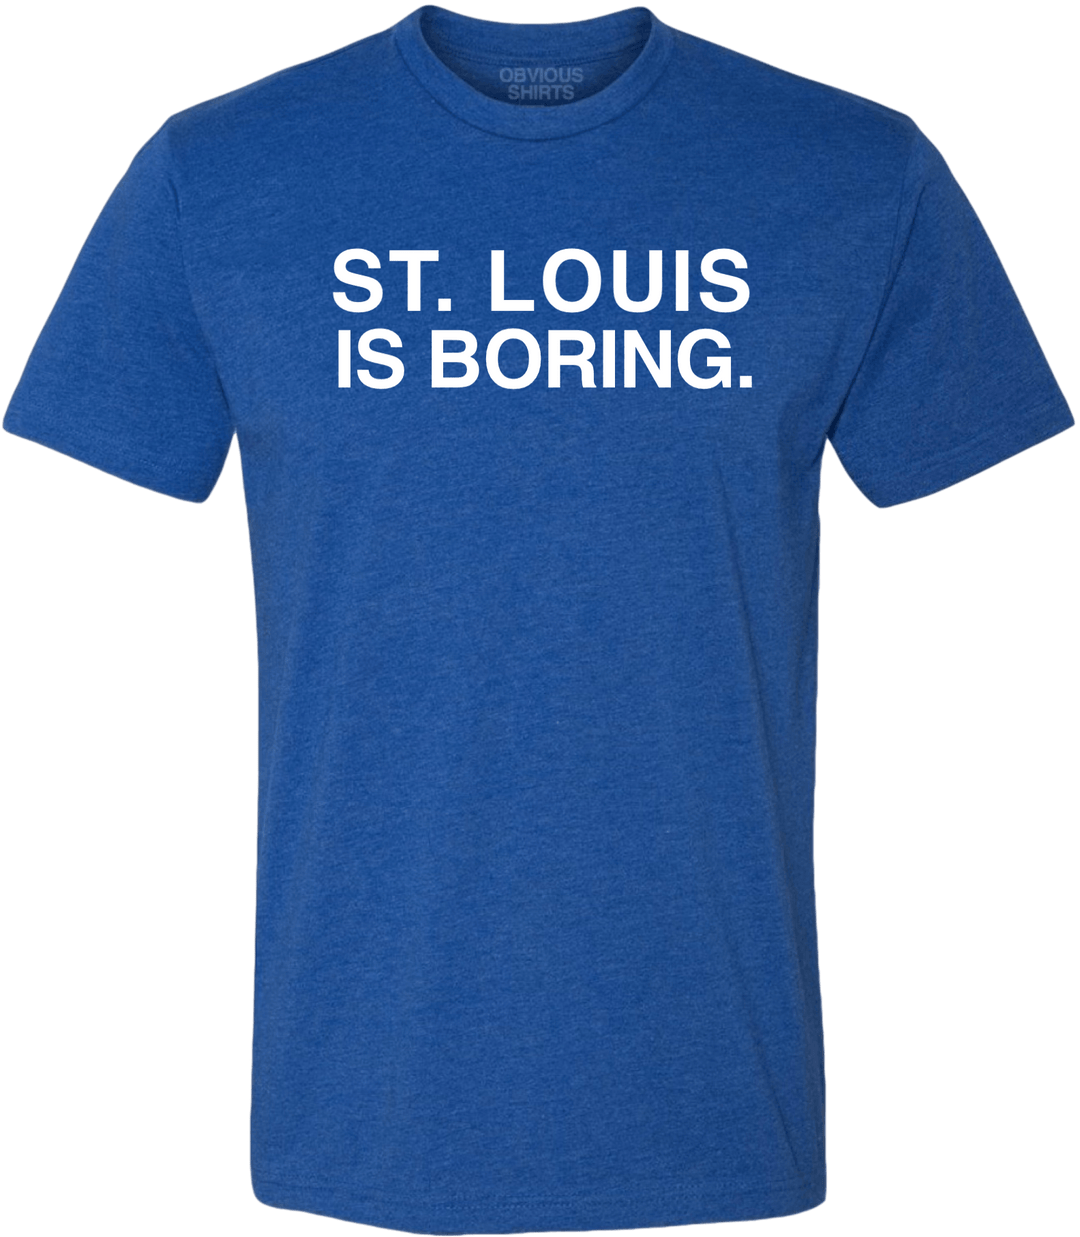 ST. LOUIS IS BORING. - OBVIOUS SHIRTS.